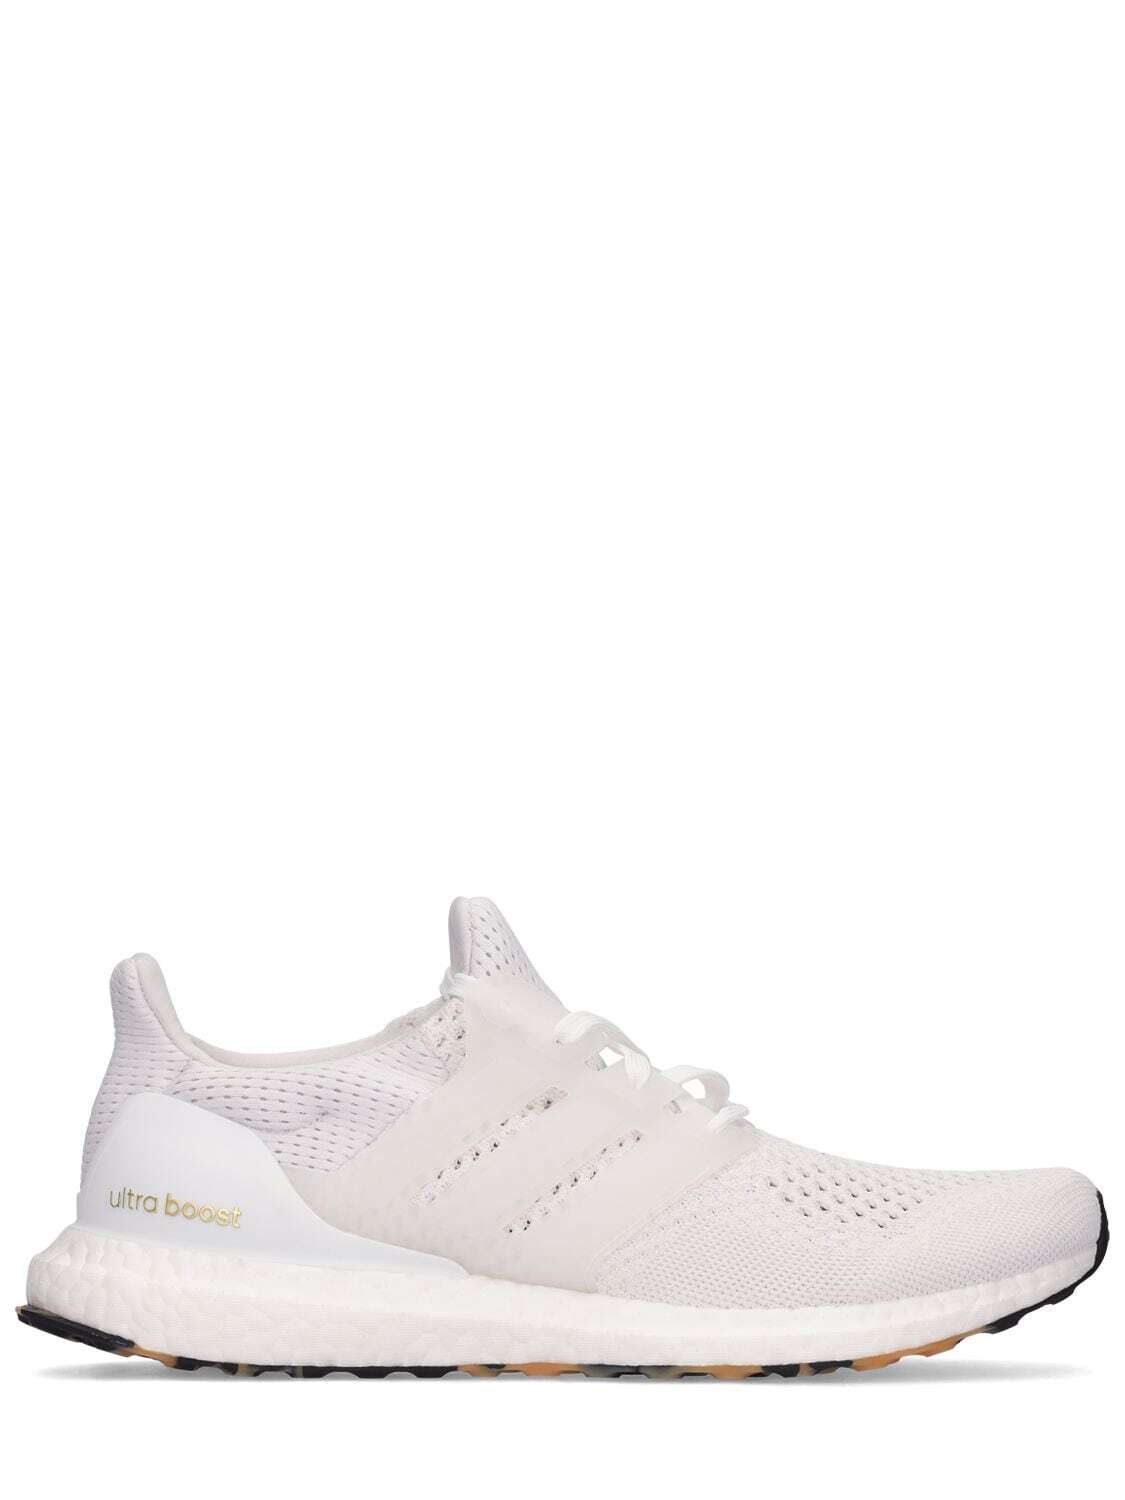 ADIDAS PERFORMANCE Ultraboost 1.0 Sneakers in white